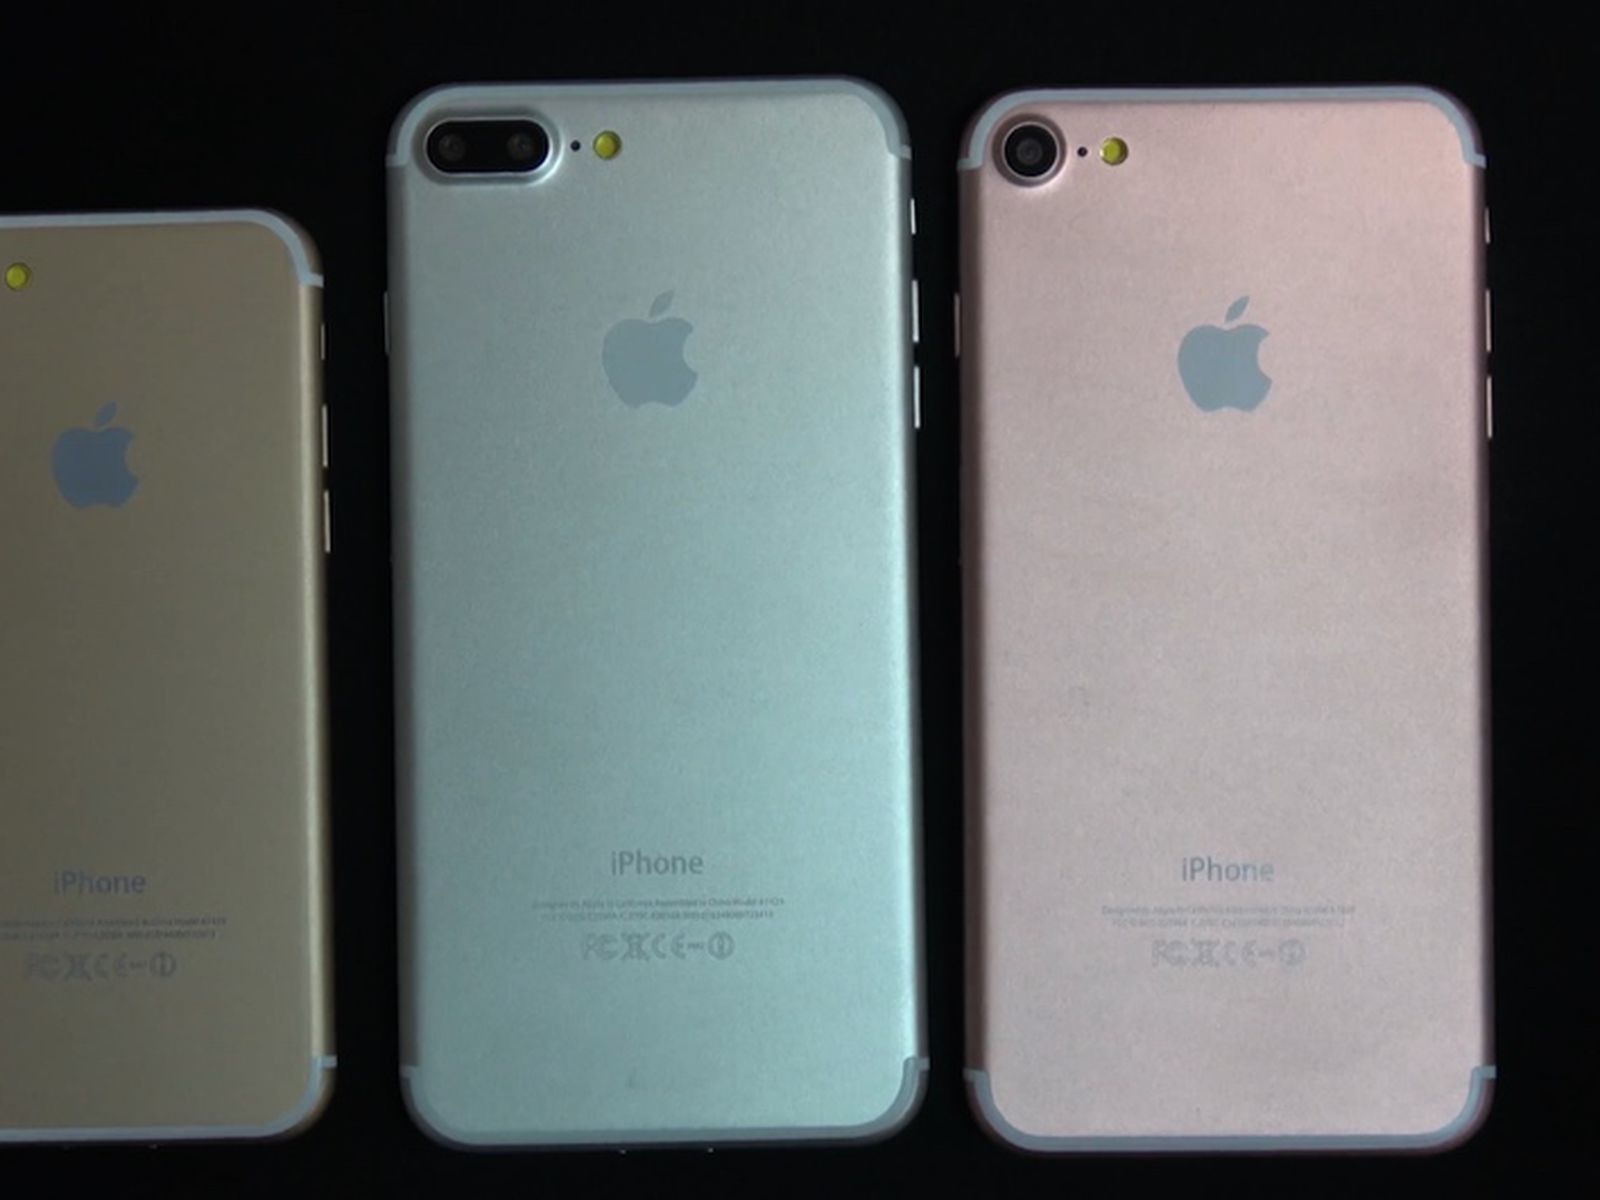 Which version is iPhone 7 at?